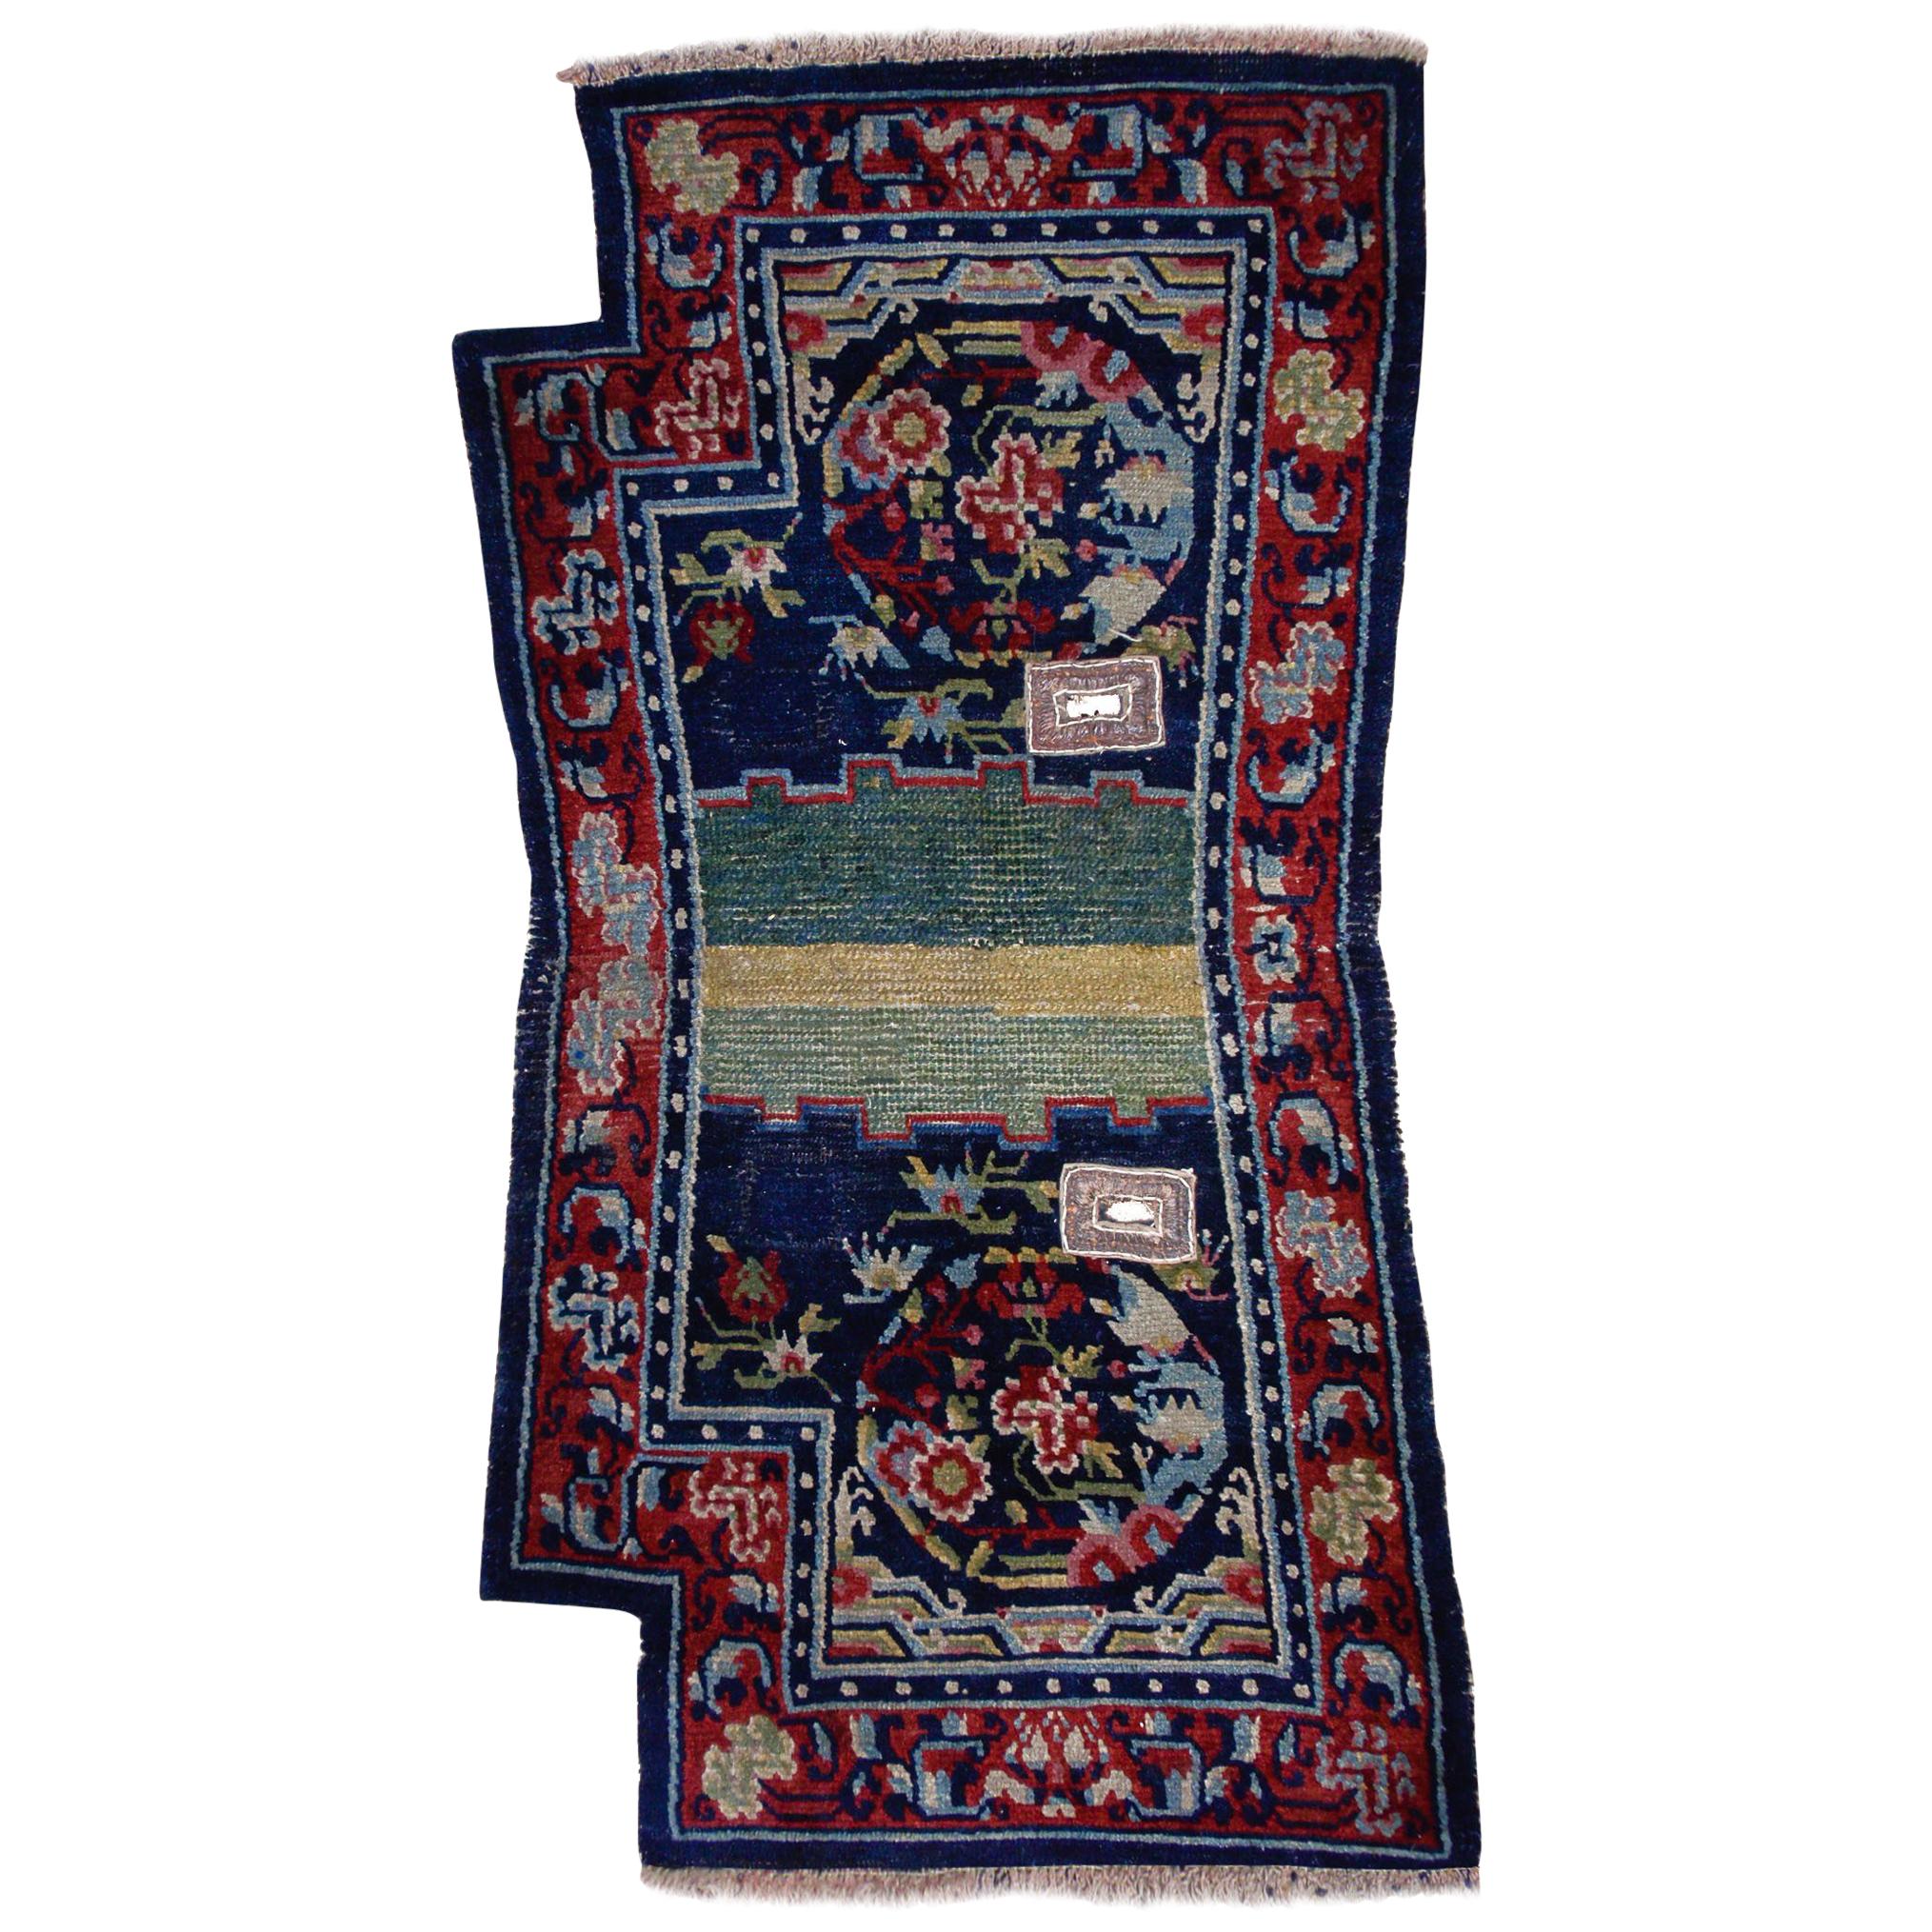 19th Century Peony Flower Medallions Blue Green and Red Saddle Horse Tibetan Rug For Sale